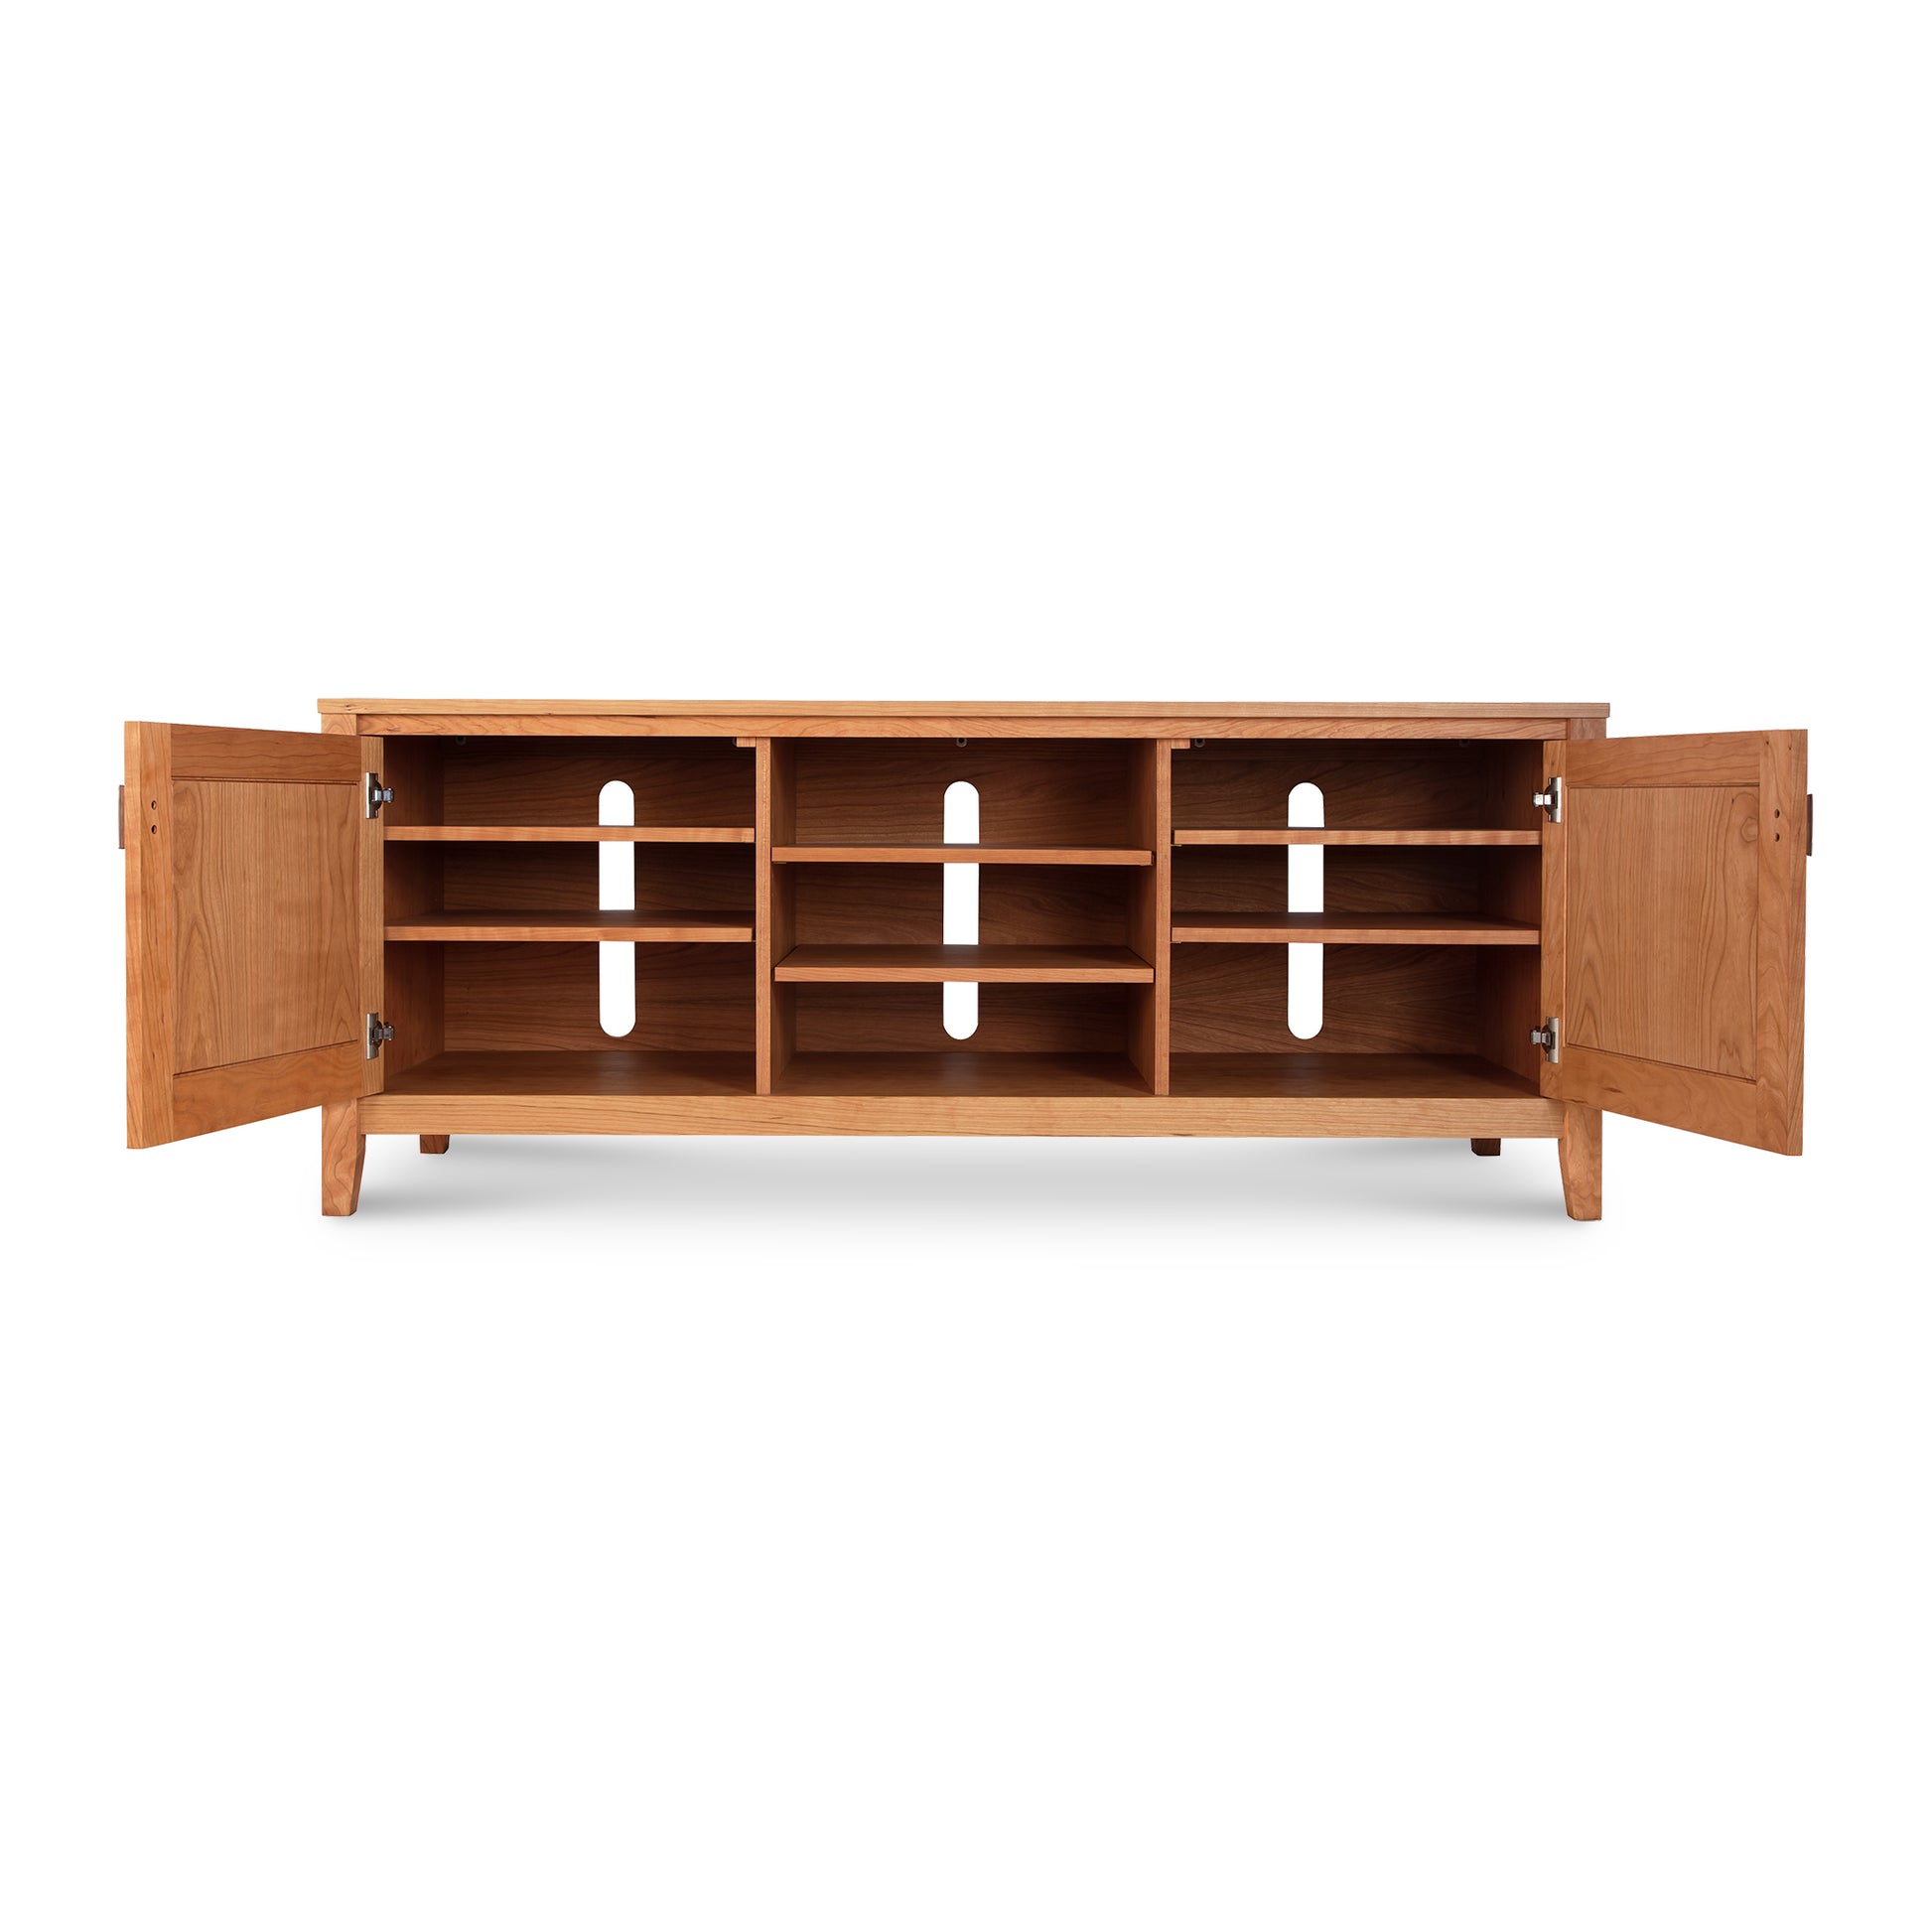 An Andover Modern 64" TV stand made by Maple Corner Woodworks, constructed of hardwood with shelves and drawers.